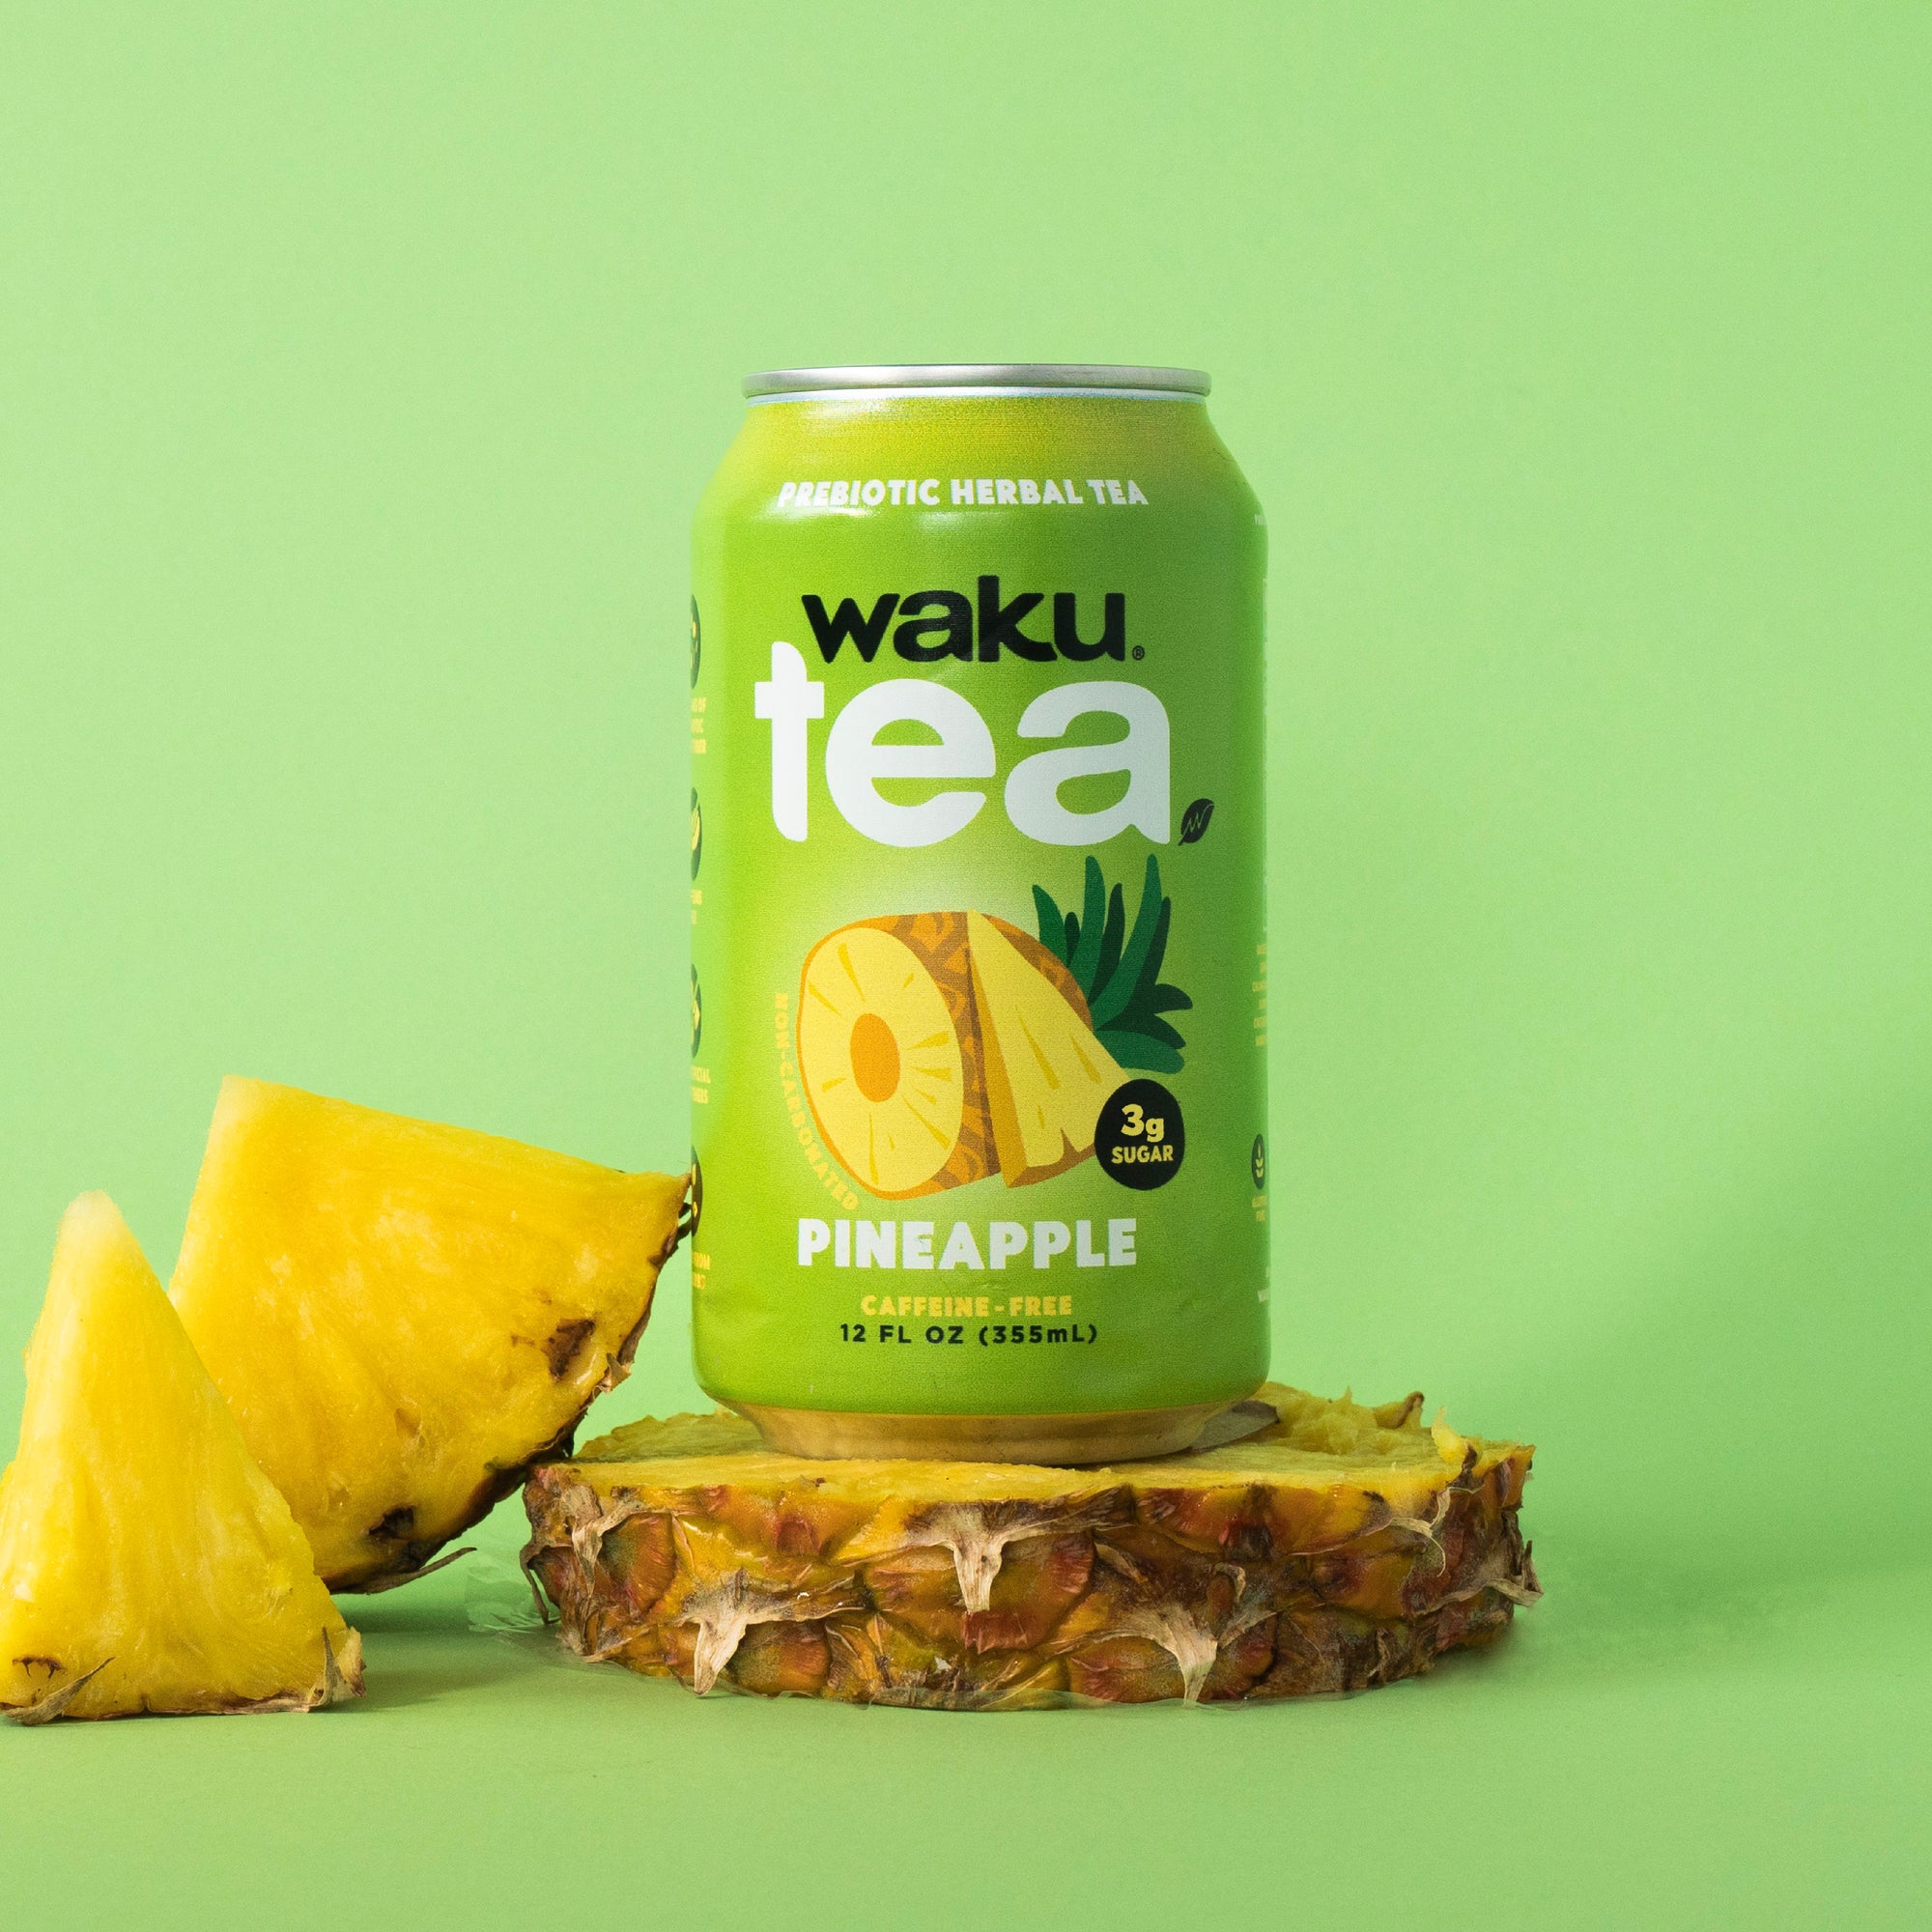 Pineapple- CANS - 12oz